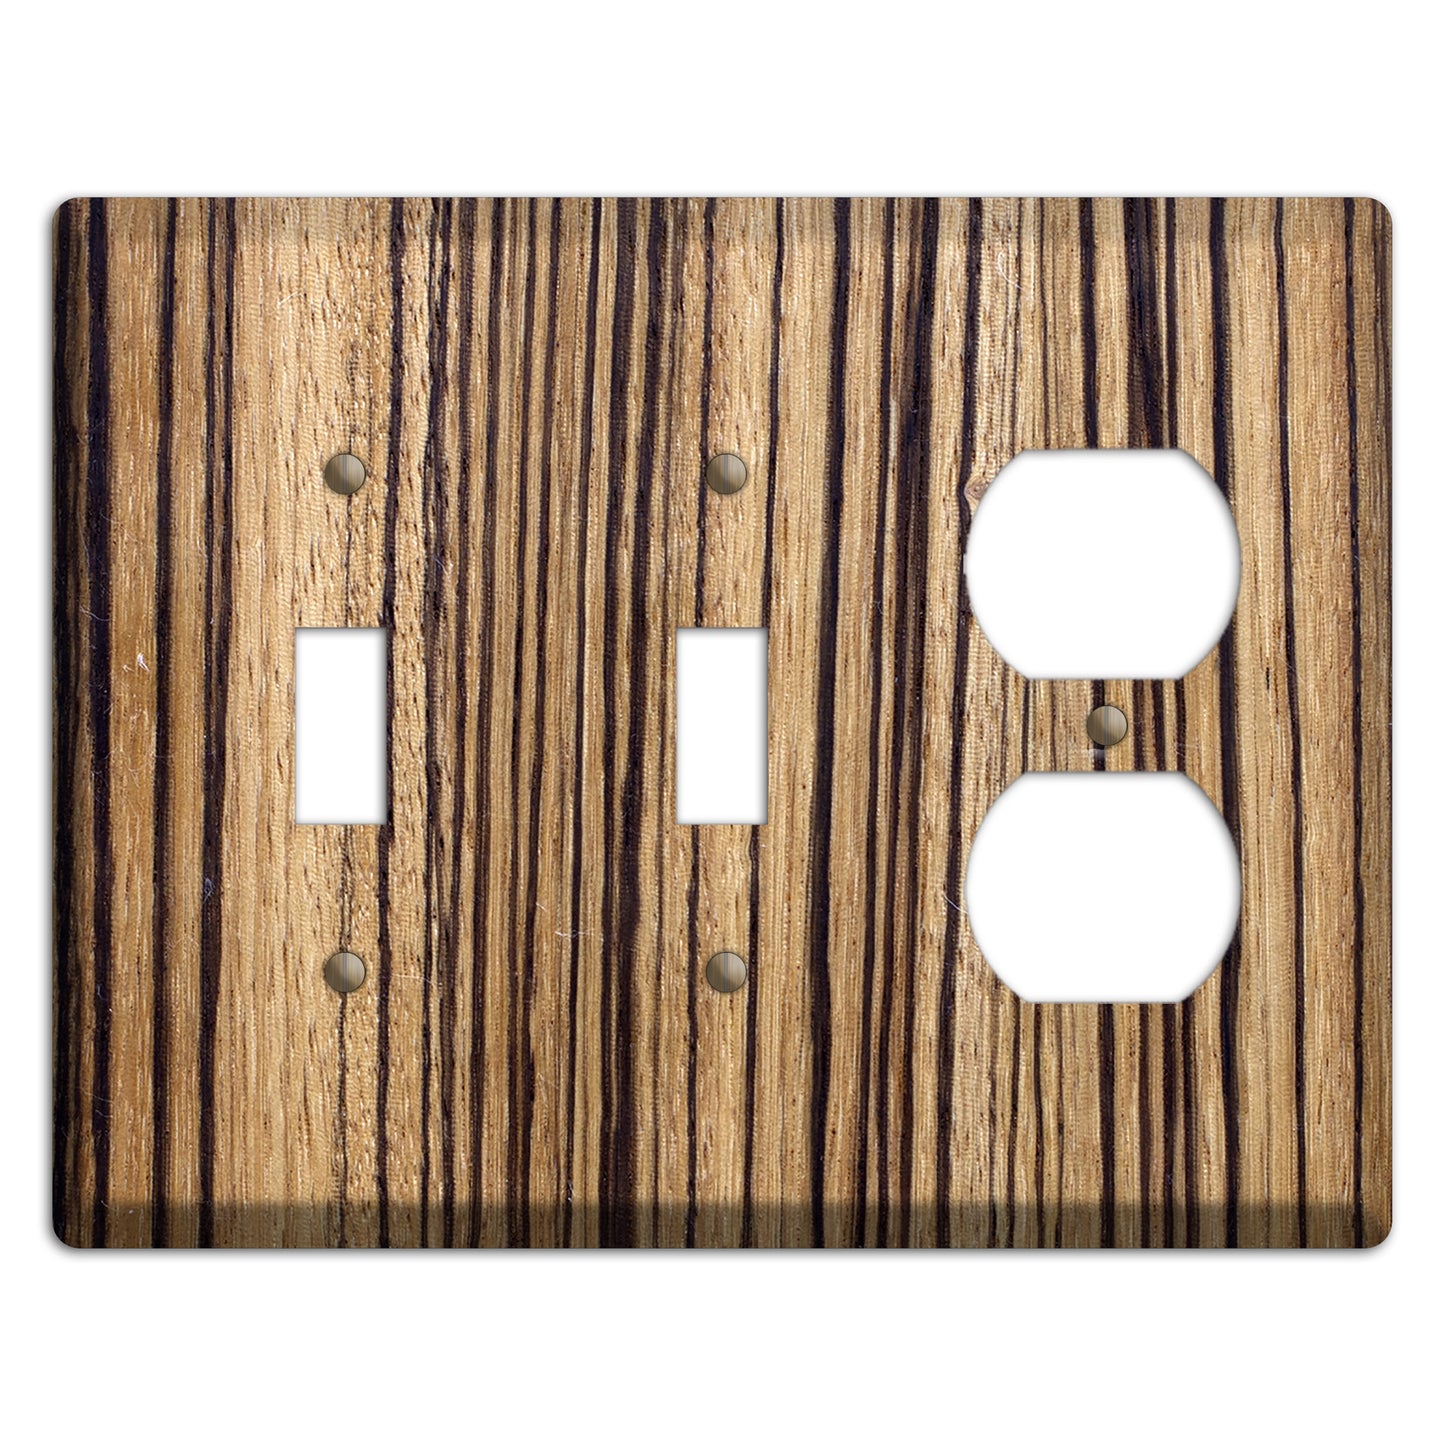 Zebrawood Wood 2 Toggle / Duplex Outlet Cover Plate